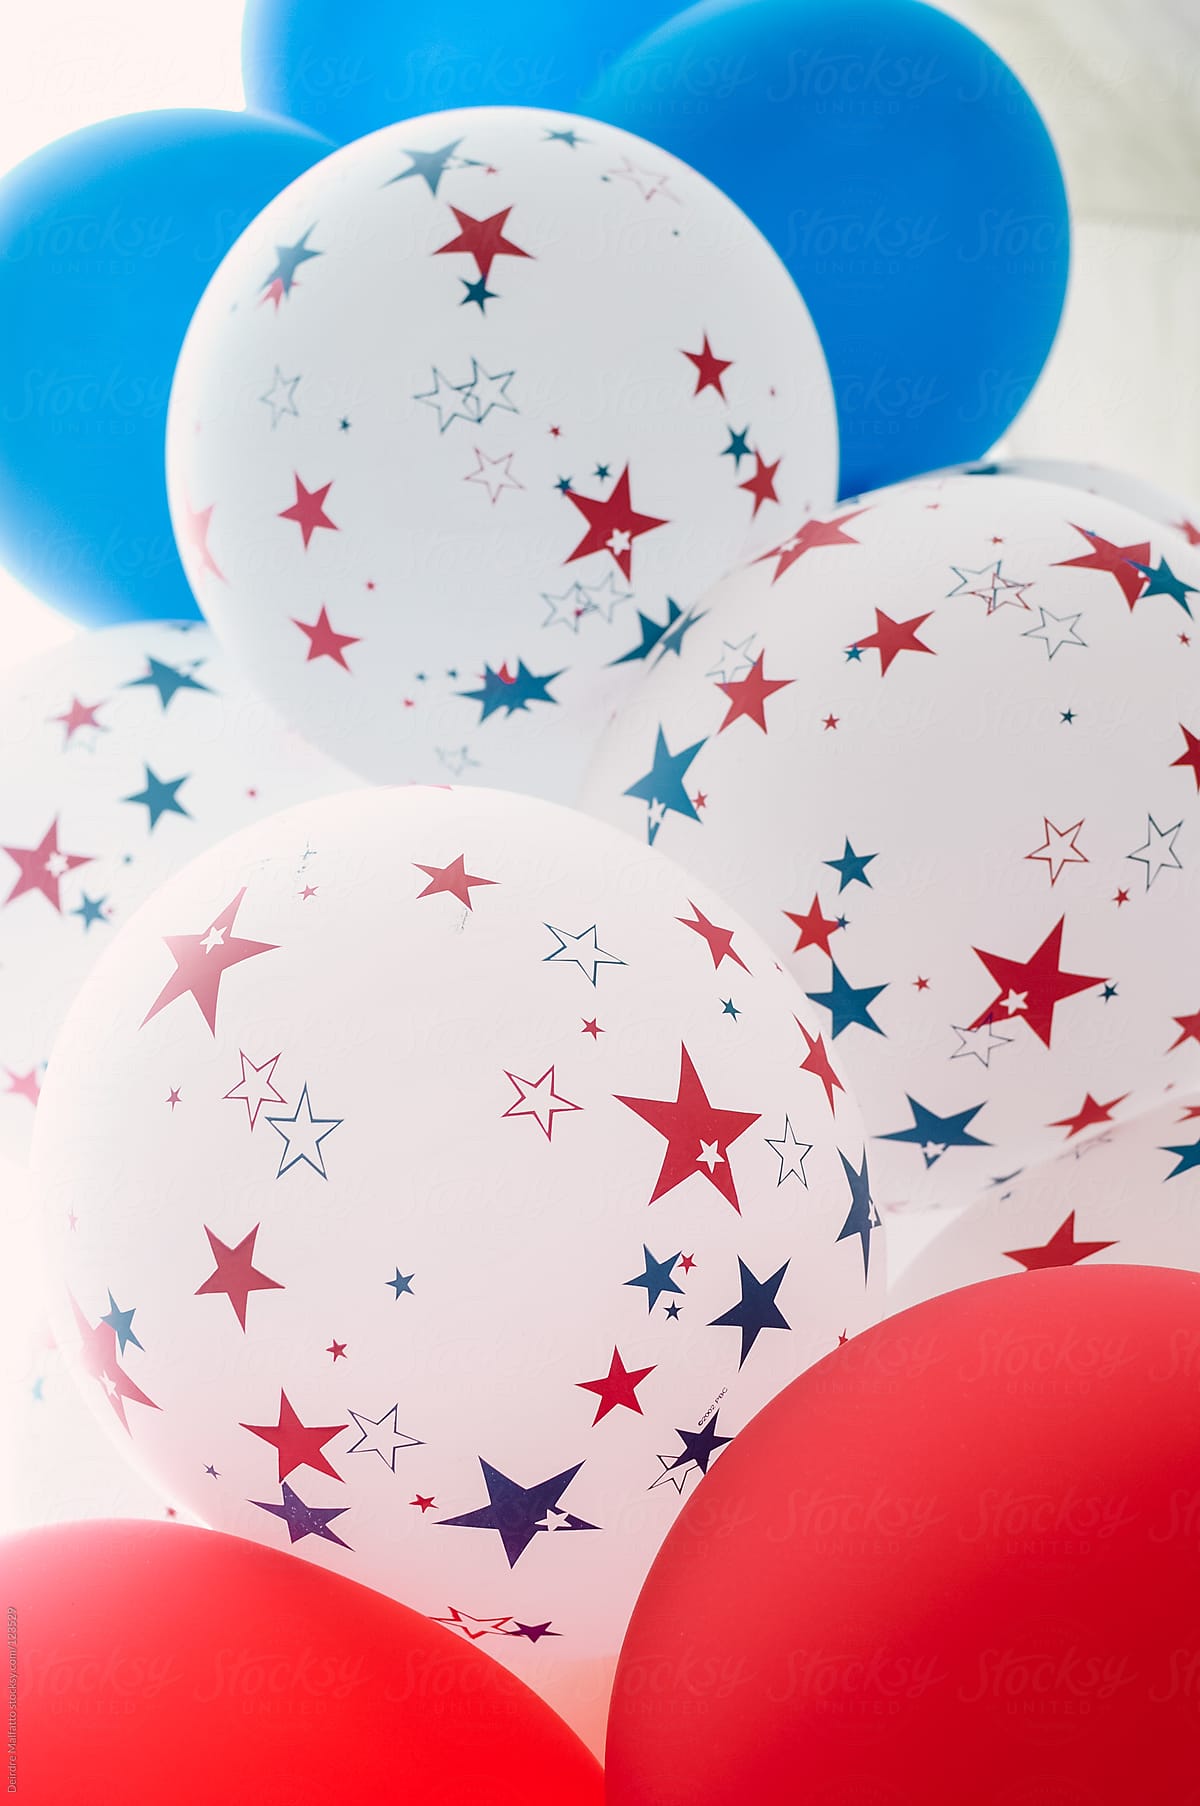 Red, white, and blue balloons for the Fourth of July